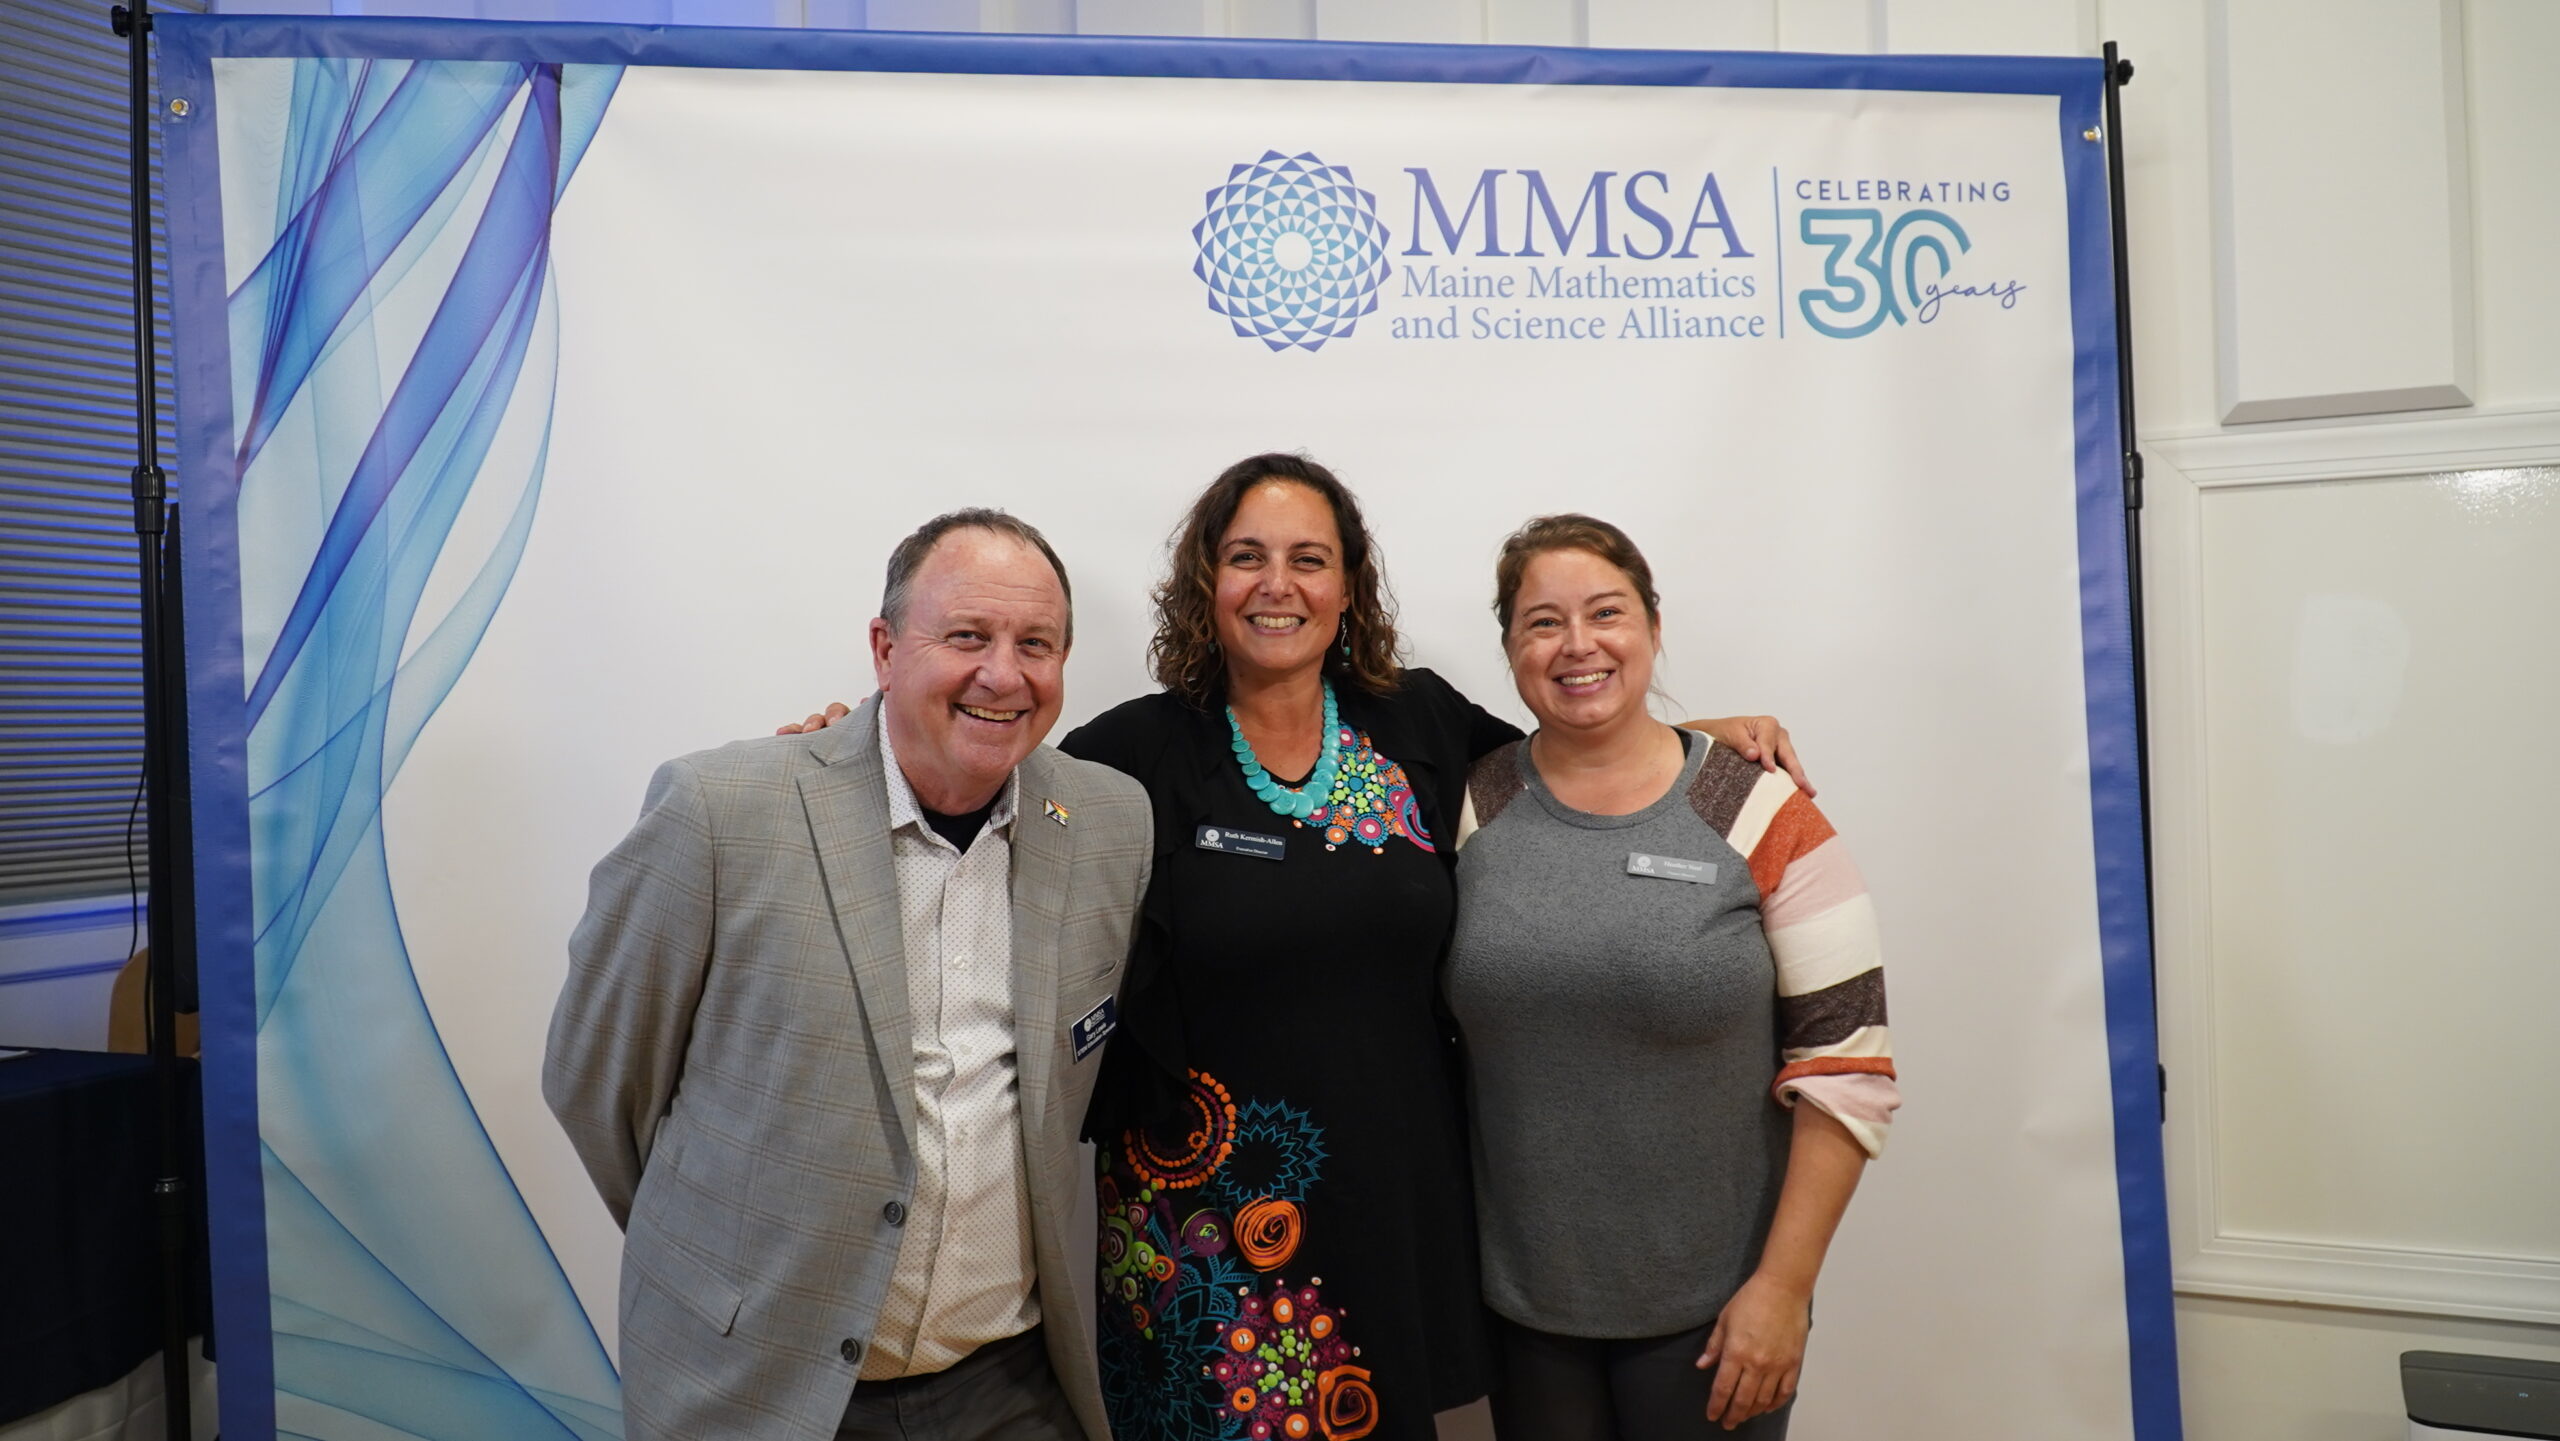 Three MMSA staff pose in front of a photo banner.